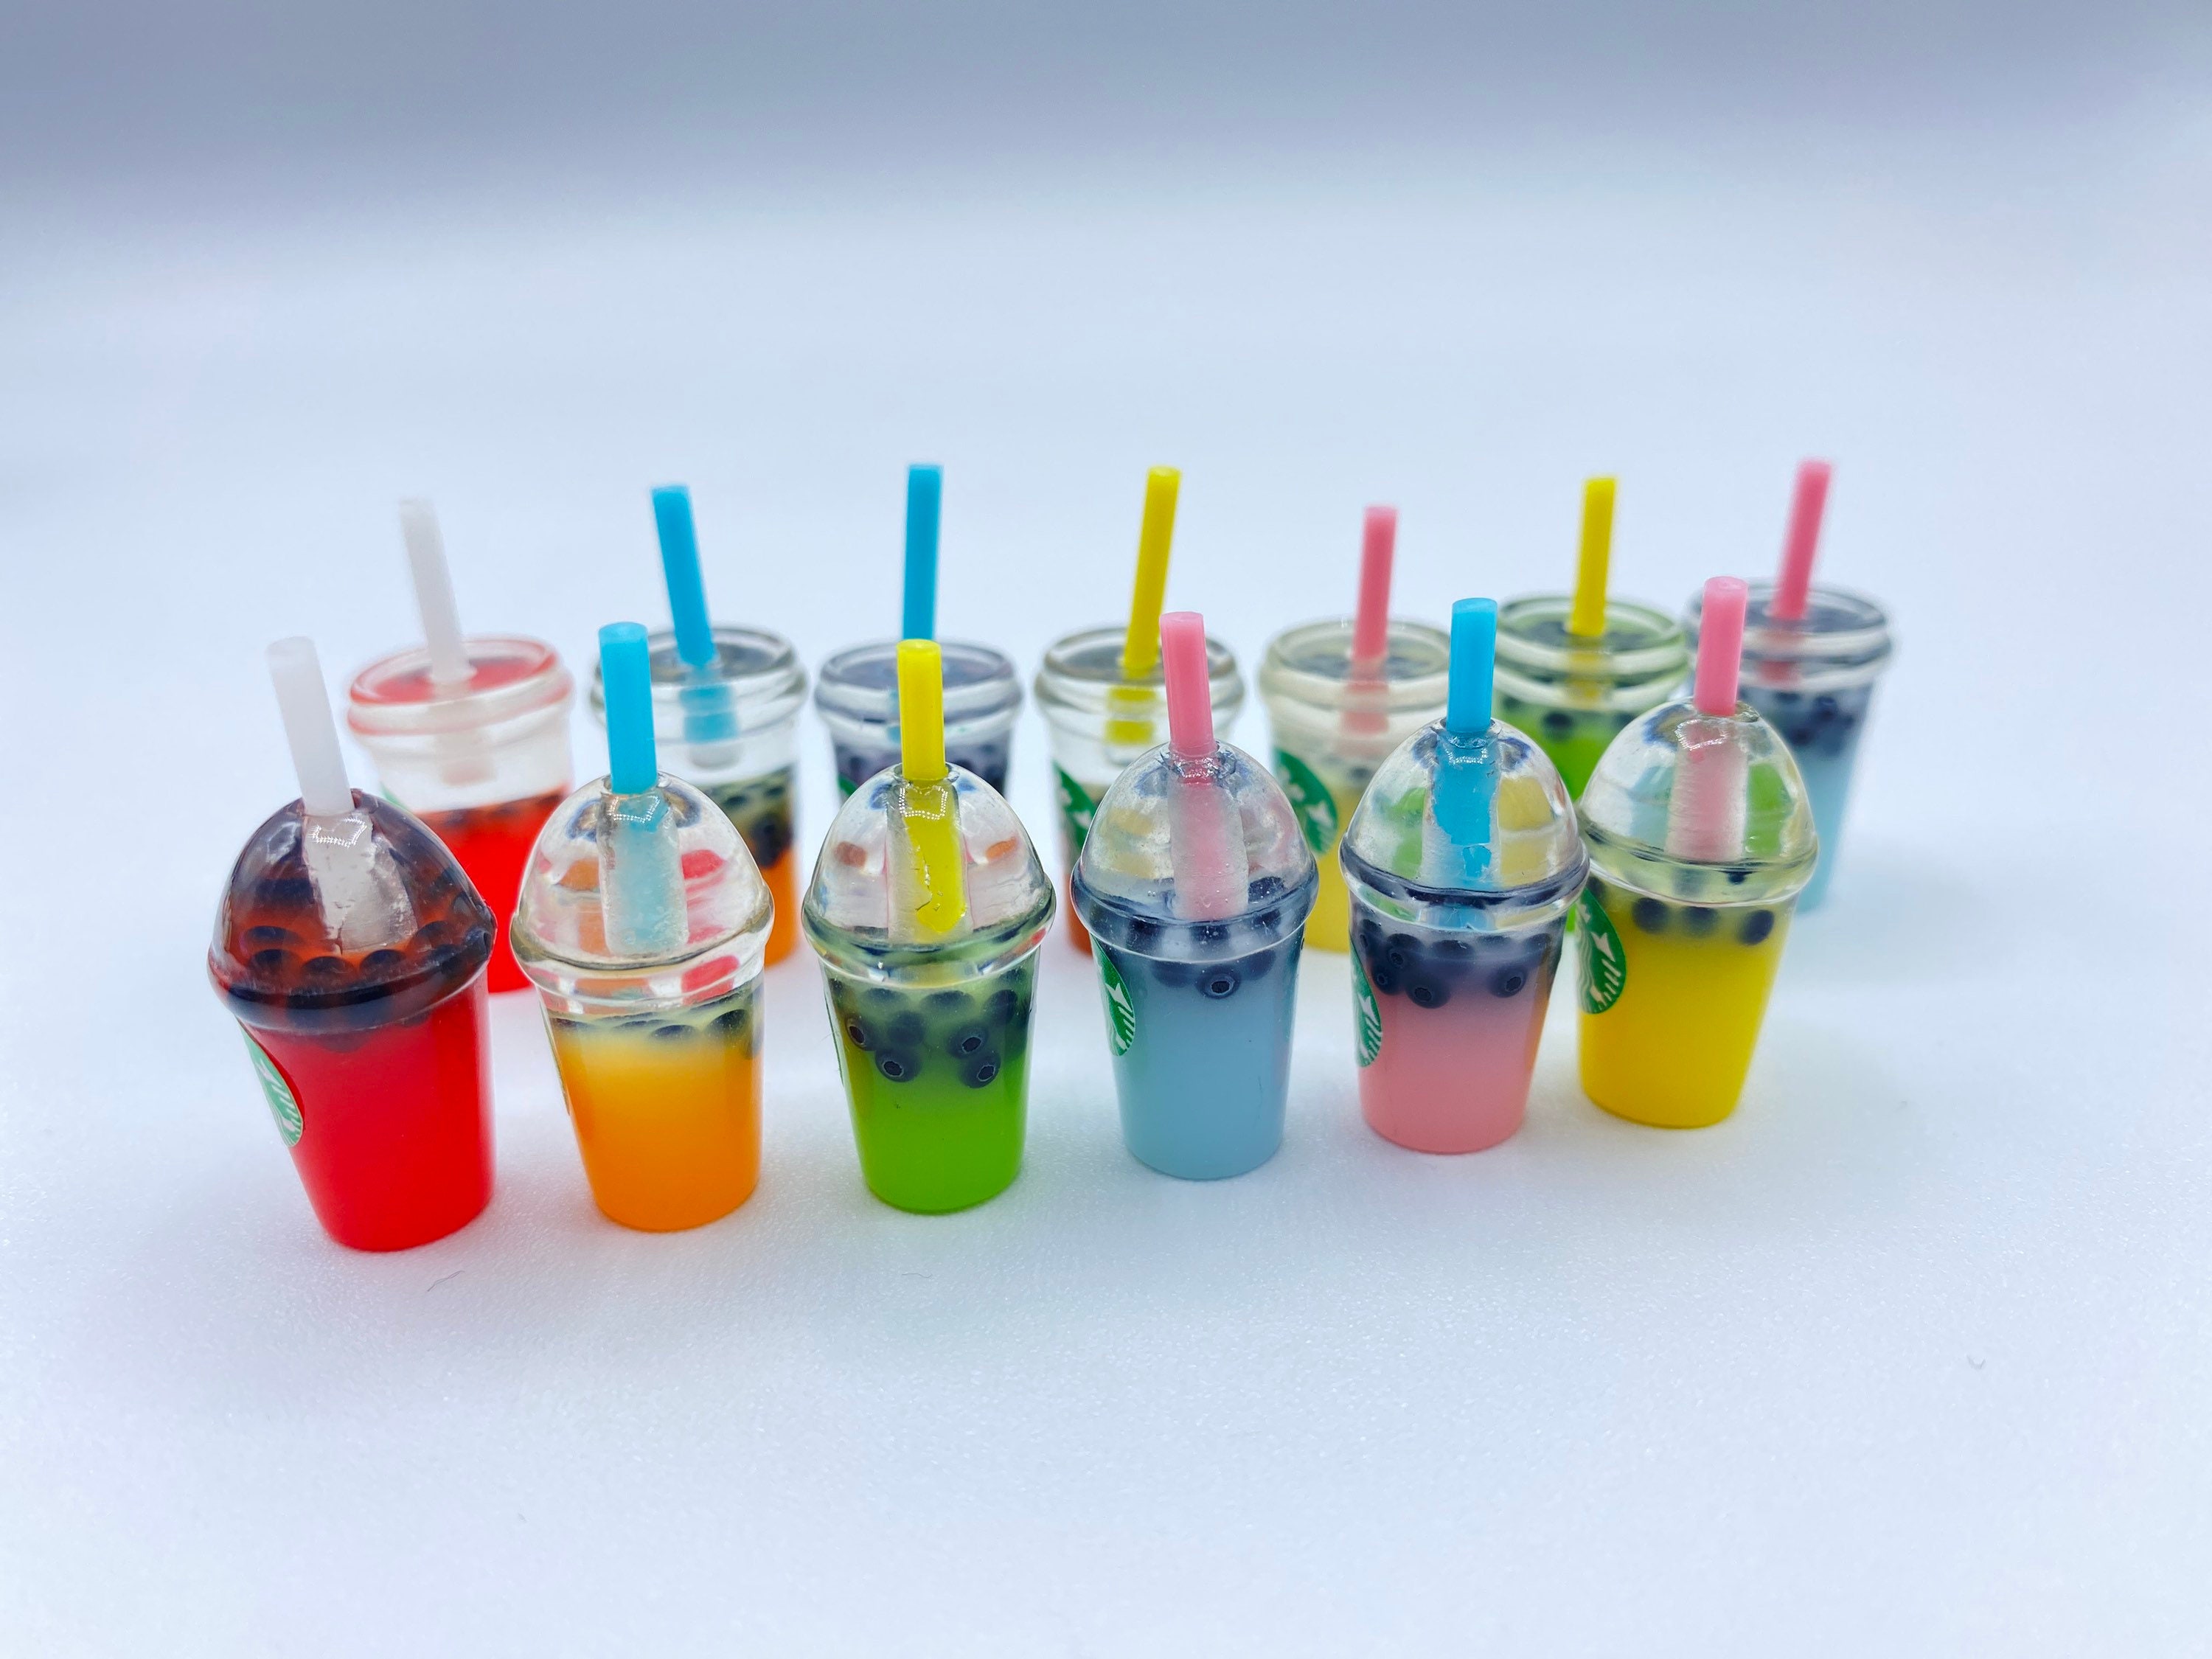  Thoughtfully Gourmet, Mini Boba Party Set, Makes 16 Tasting  Portions Of Bubble Tea, Includes 4 Flavors, Boba Pearls, Cups, Lids, And  Straws : Grocery & Gourmet Food